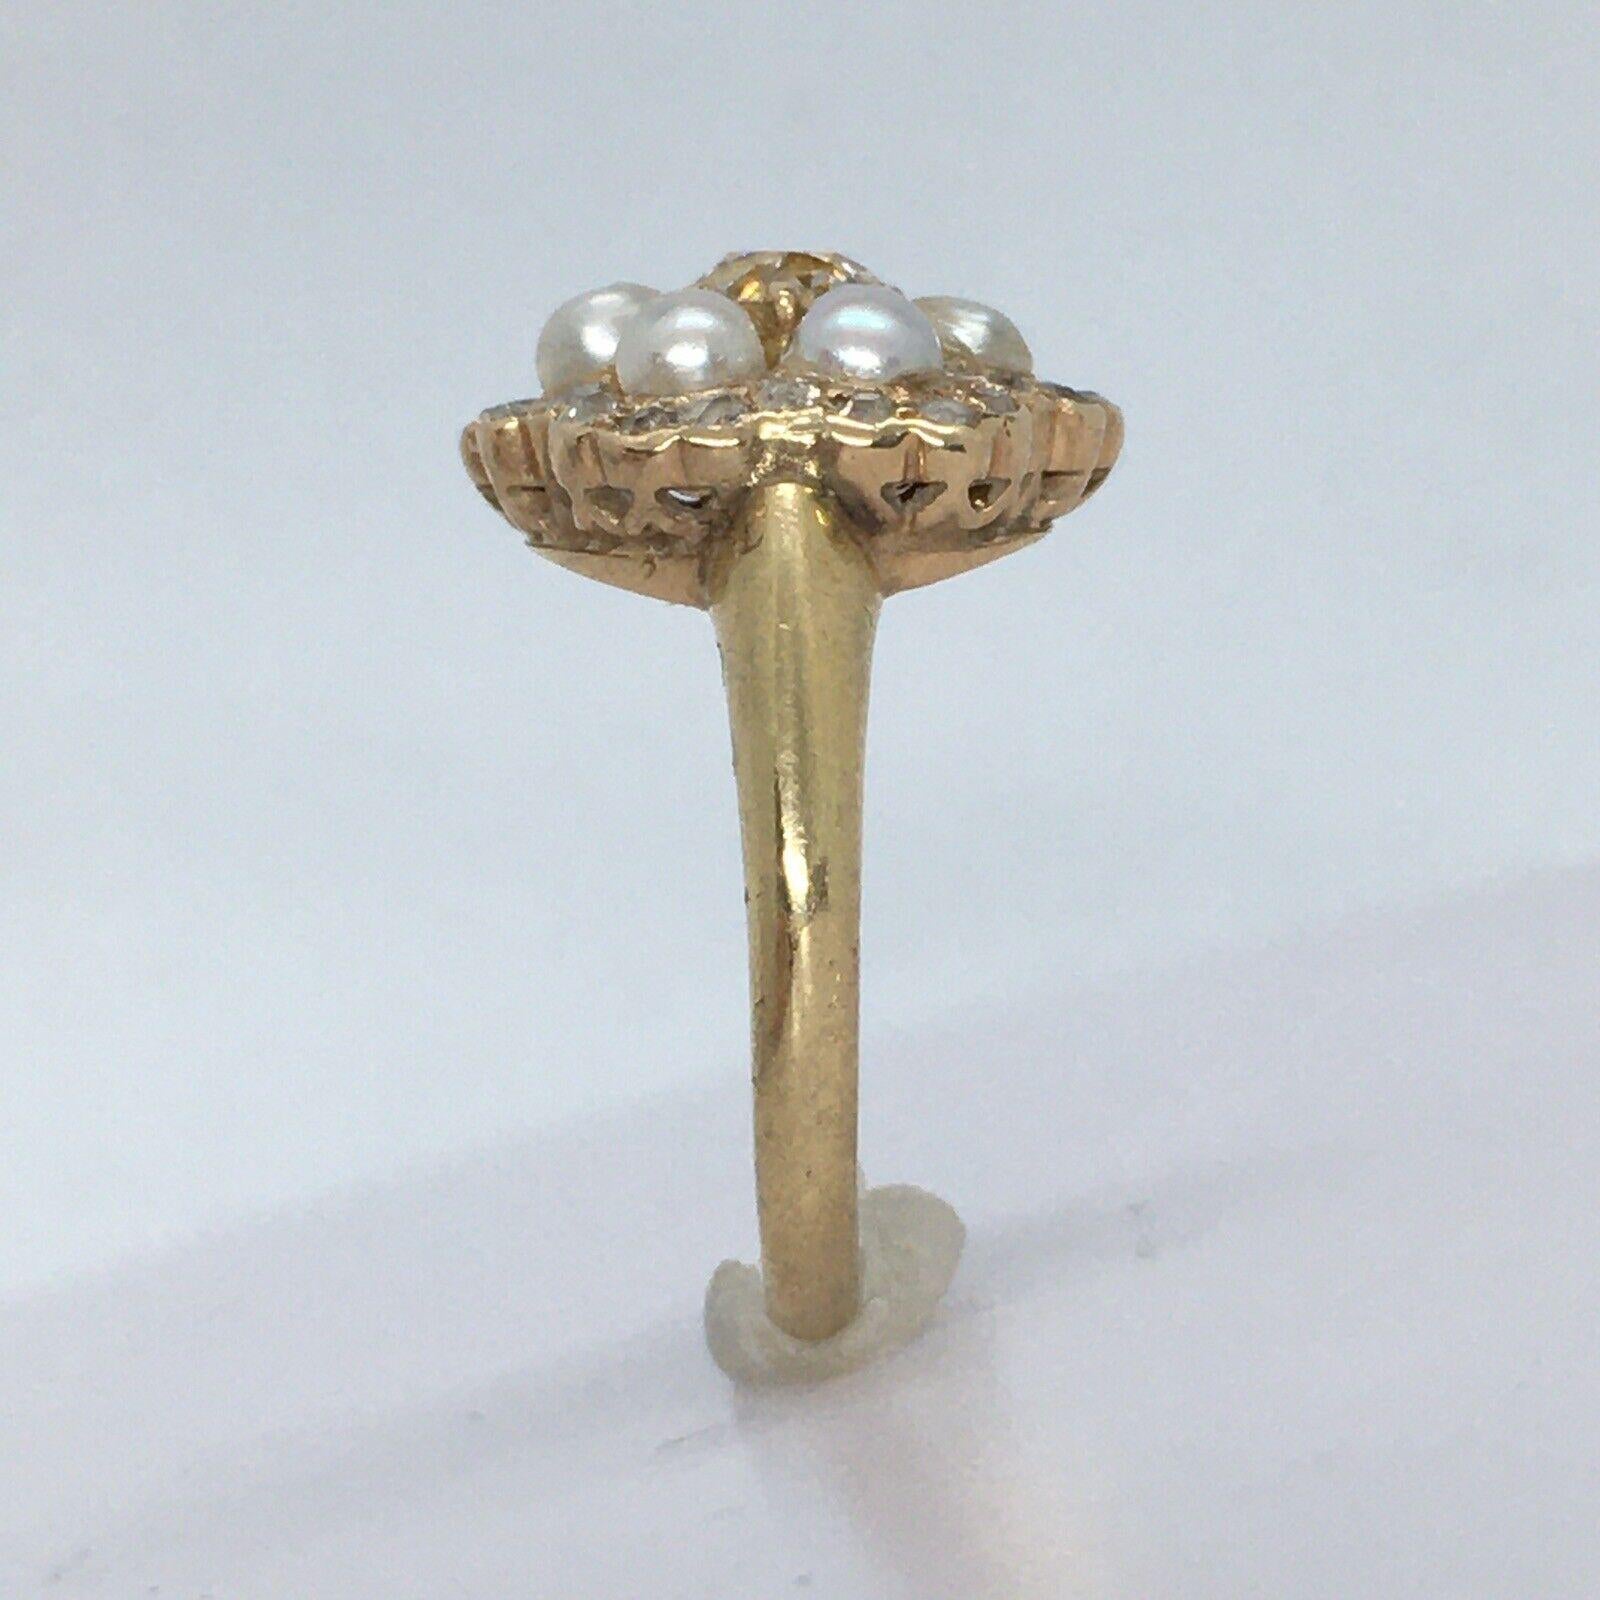 
Antique 14K Yellow gold 3/4 Carat Diamond Pearl American  Ring Size 6

Ower 100 Yrs of age
 Size 6
 Center Diamond 5.2-5.3 mm diameter & 3.3 mm deep, a little more than 1/2 Carat Old Cut Diamond 
24 pieces of Single Cut diamonds .01 carat each,